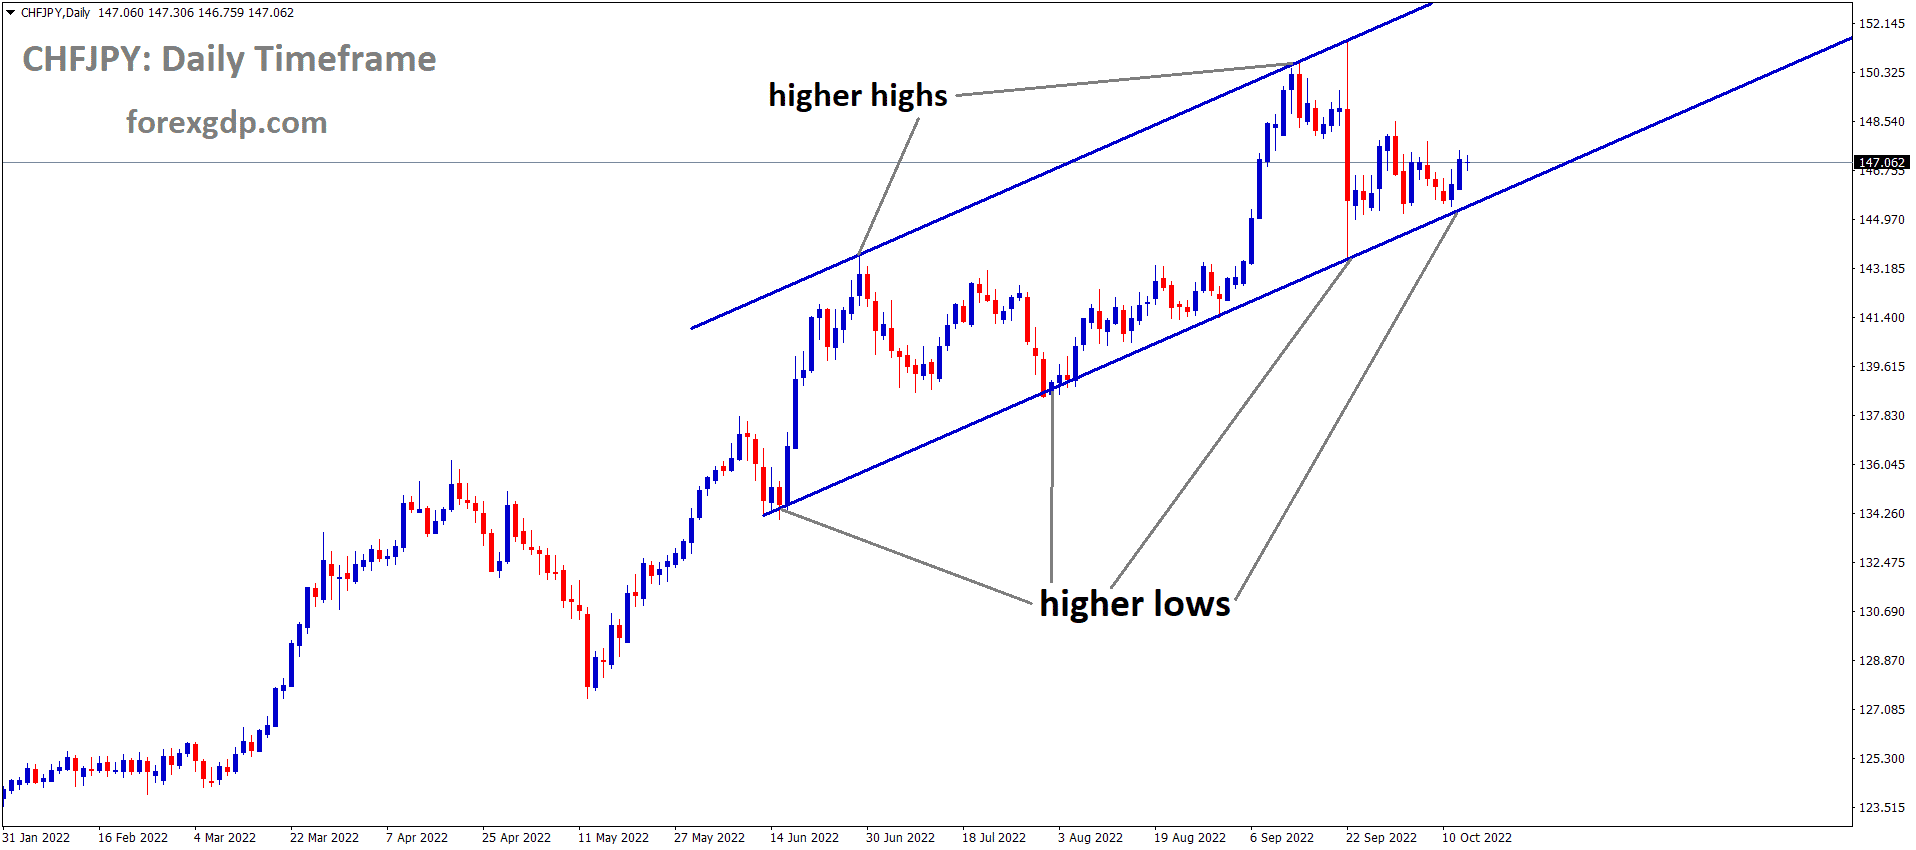 CHFJPY is moving in an Ascending channel and the market is rebounded from the higher low area of the channel